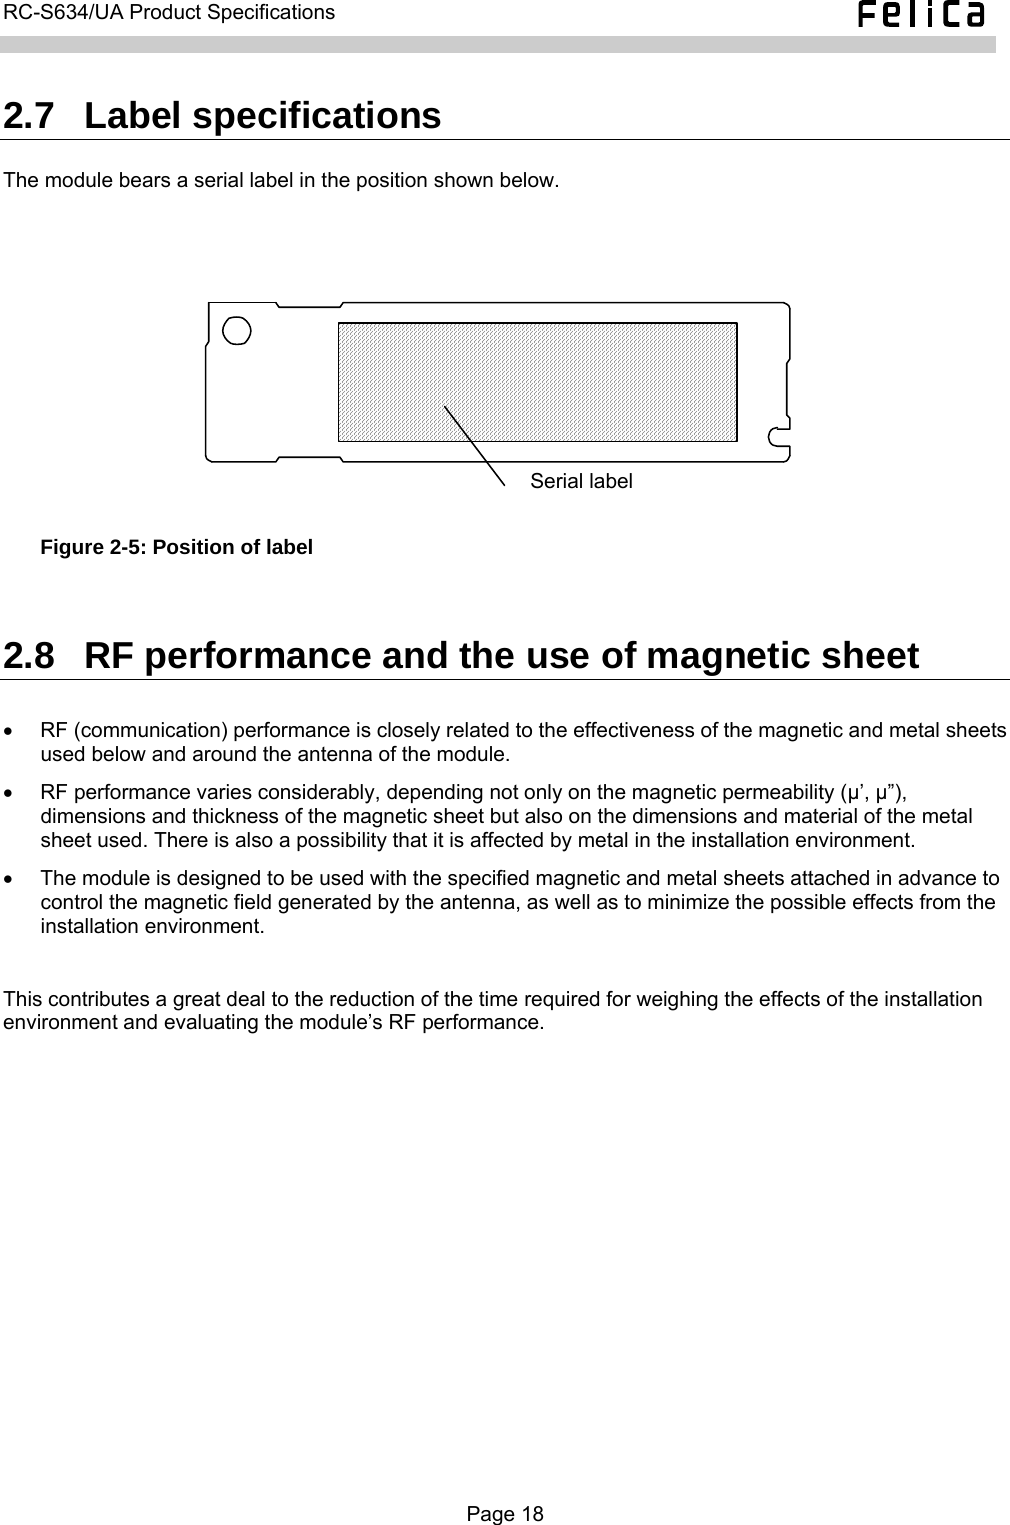   RC-S634/UA Product Specifications  2.7  Label specifications The module bears a serial label in the position shown below.  Serial label  Figure 2-5: Position of label  2.8  RF performance and the use of magnetic sheet •  RF (communication) performance is closely related to the effectiveness of the magnetic and metal sheets used below and around the antenna of the module. •  RF performance varies considerably, depending not only on the magnetic permeability (μ’, μ”), dimensions and thickness of the magnetic sheet but also on the dimensions and material of the metal sheet used. There is also a possibility that it is affected by metal in the installation environment. •  The module is designed to be used with the specified magnetic and metal sheets attached in advance to control the magnetic field generated by the antenna, as well as to minimize the possible effects from the installation environment.  This contributes a great deal to the reduction of the time required for weighing the effects of the installation environment and evaluating the module’s RF performance.  Page 18  